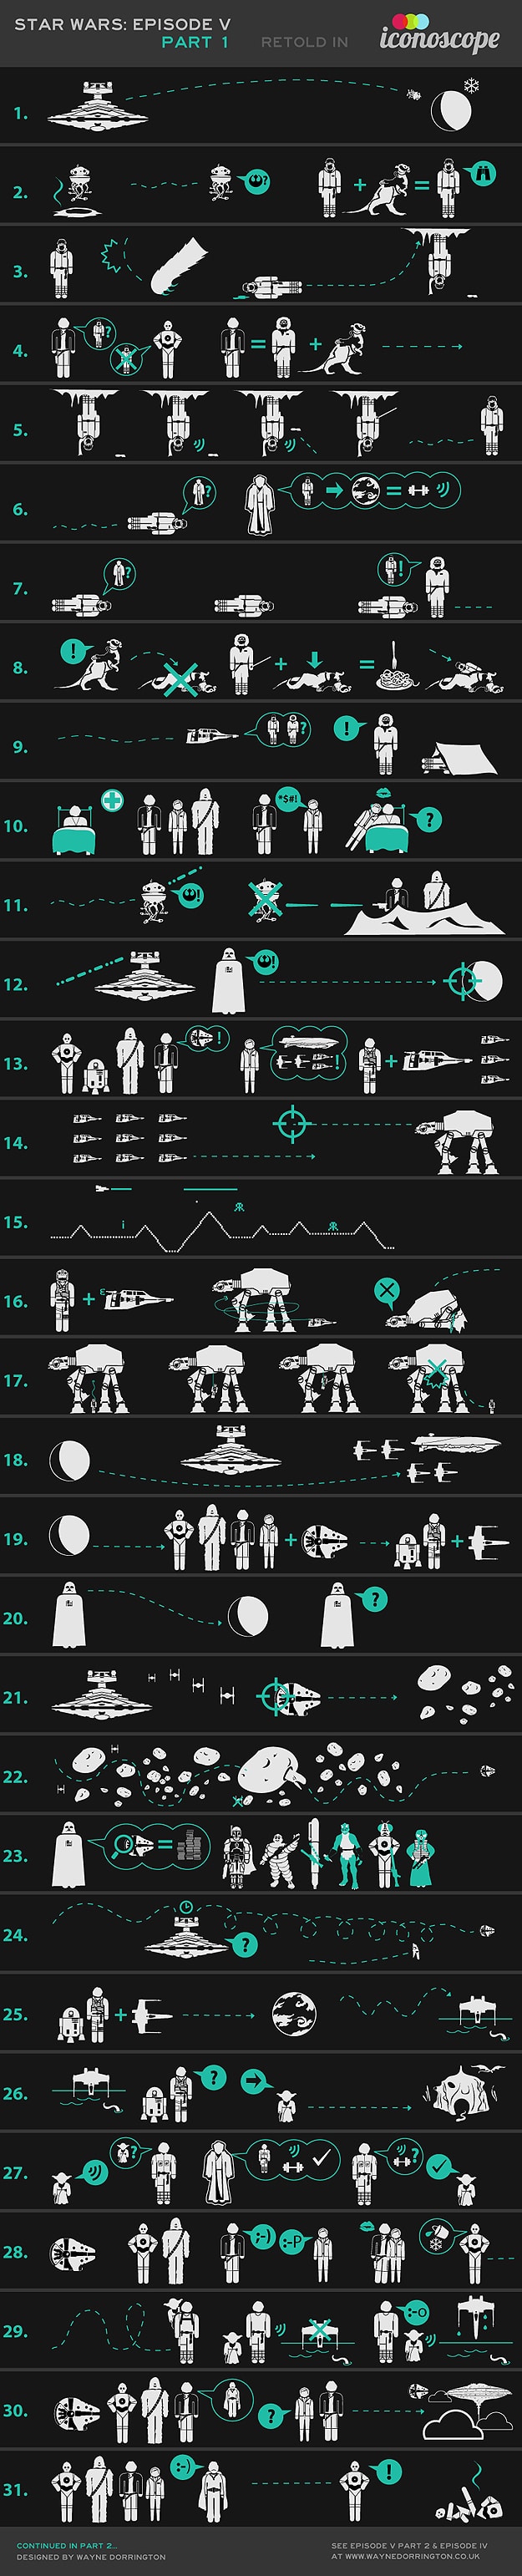 Geektastic: Star Wars Episode V Retold In Icons